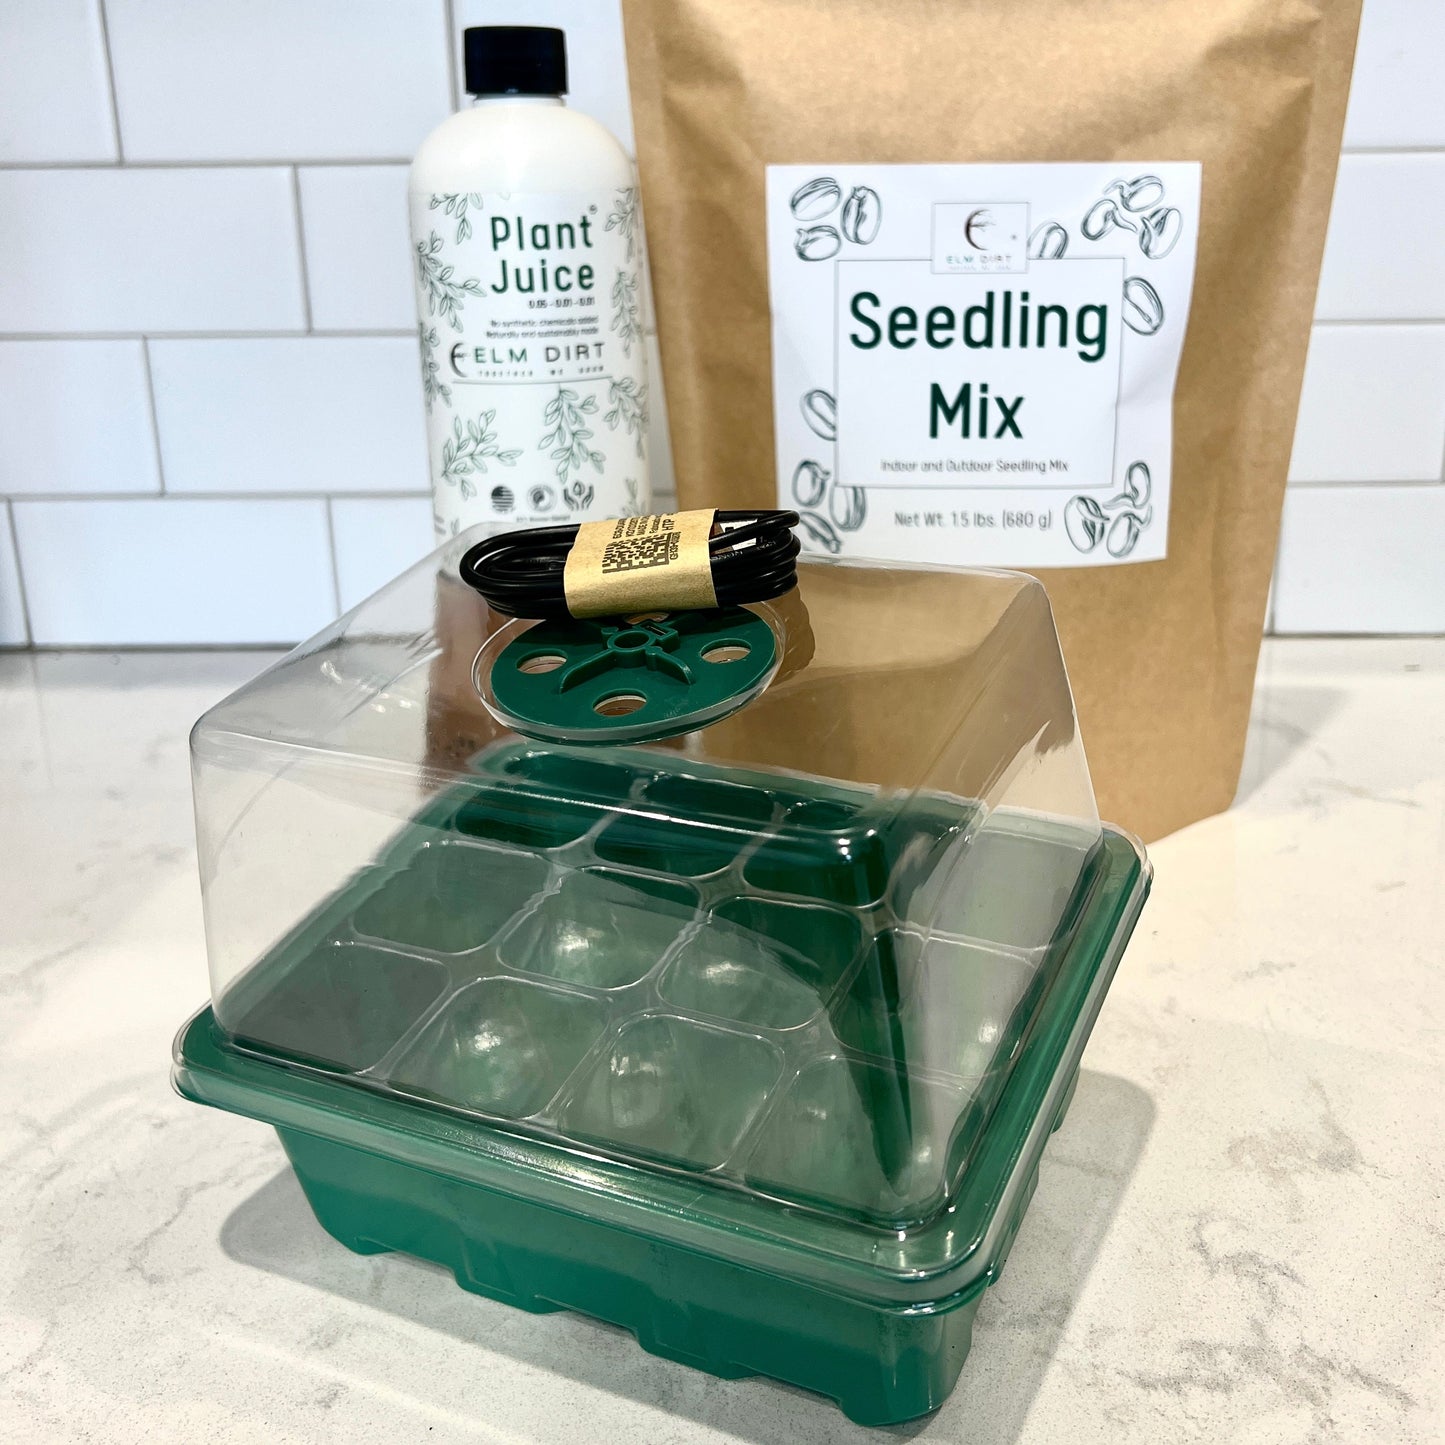 Seed Starting Tray with Plant Juice and Seedling Mix by Elm Dirt